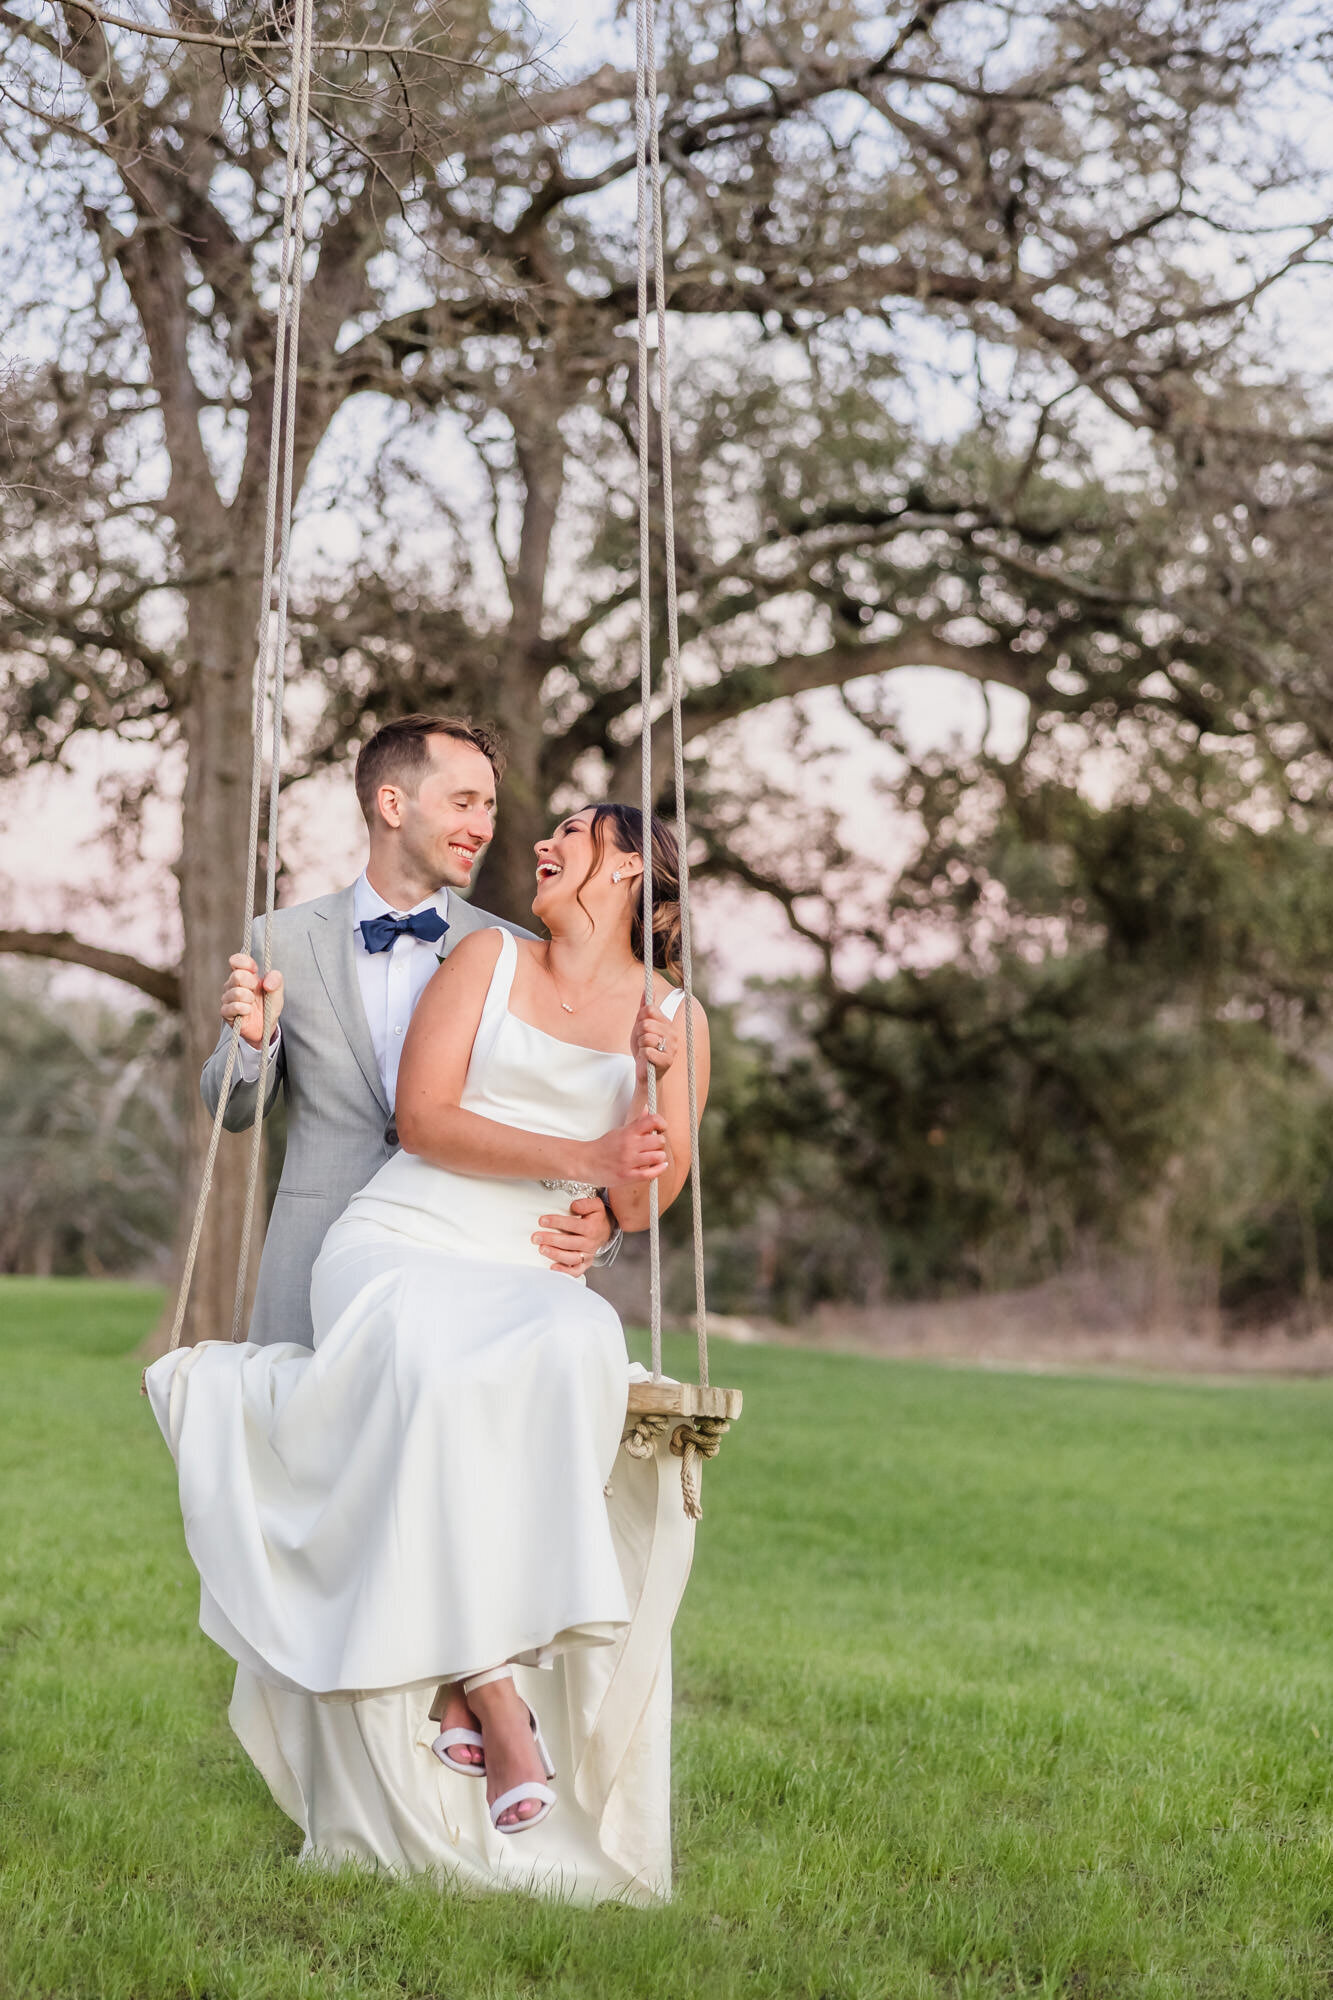 Bride and Groom embrace at the Pecan Springs Ranch in Dripping Springs, Texas.